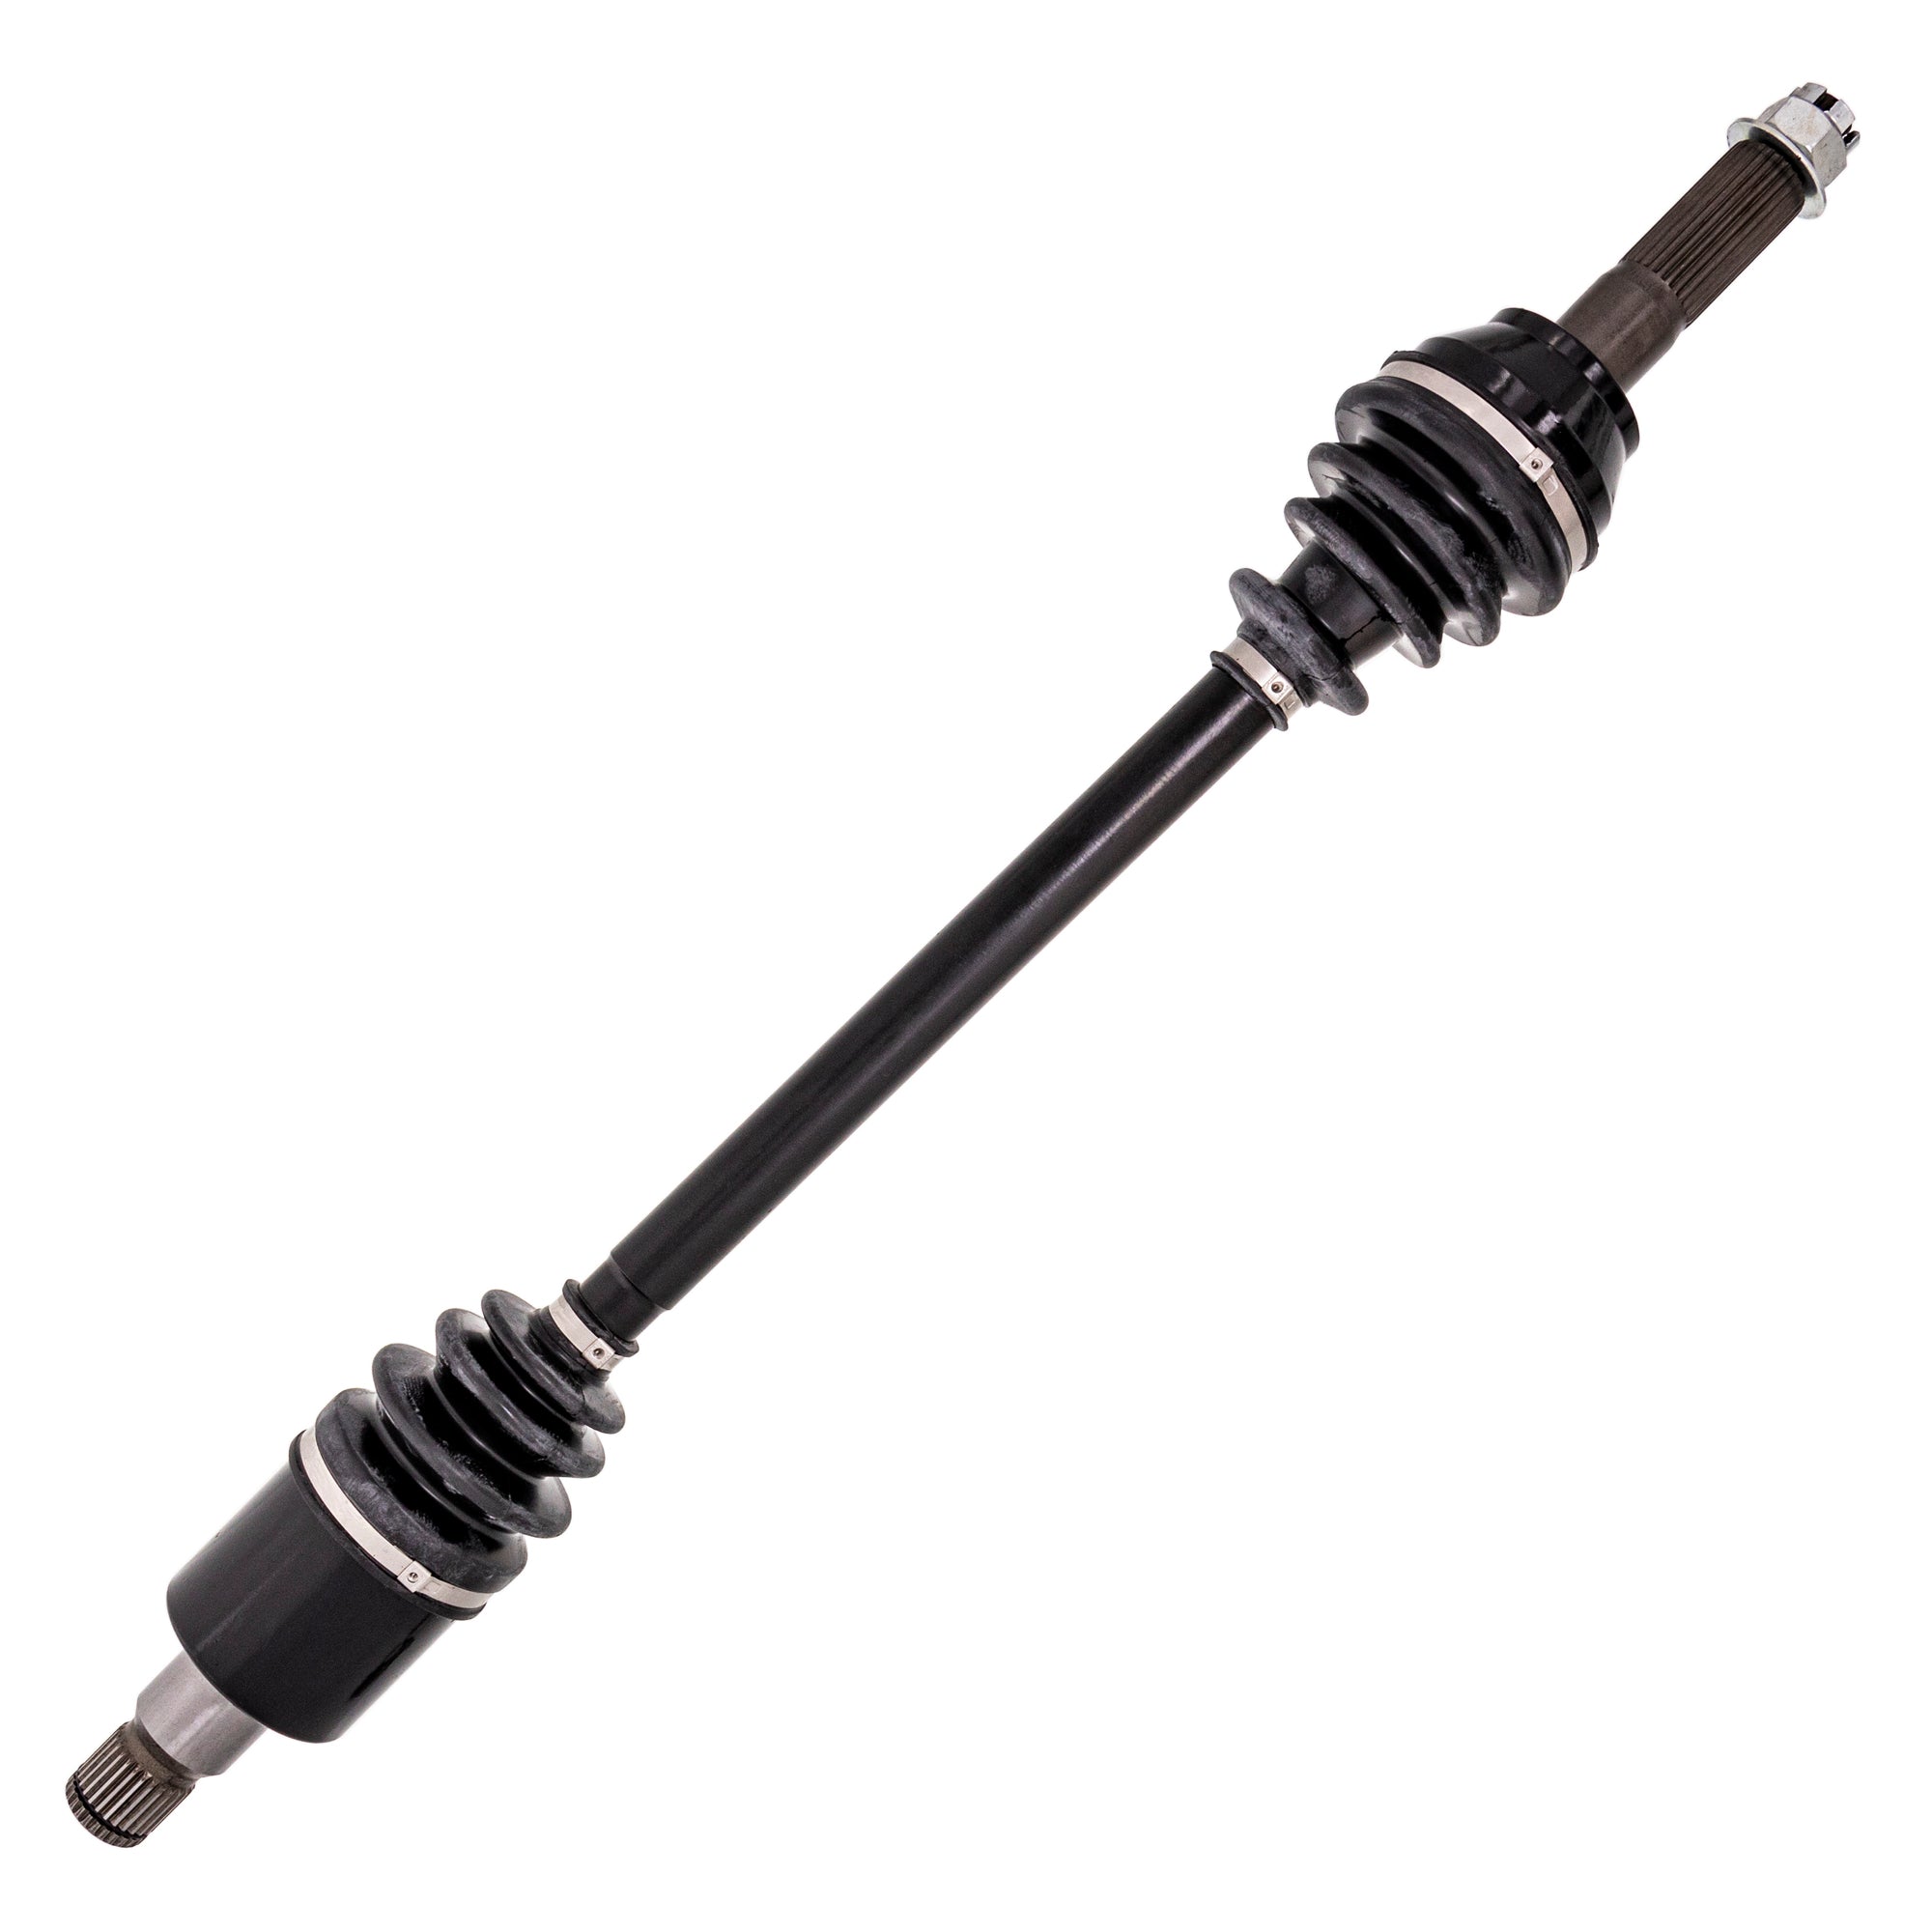 Complete F&R CV Axle Driveshaft Assembly Kit for Polaris RZR 4 RZR S